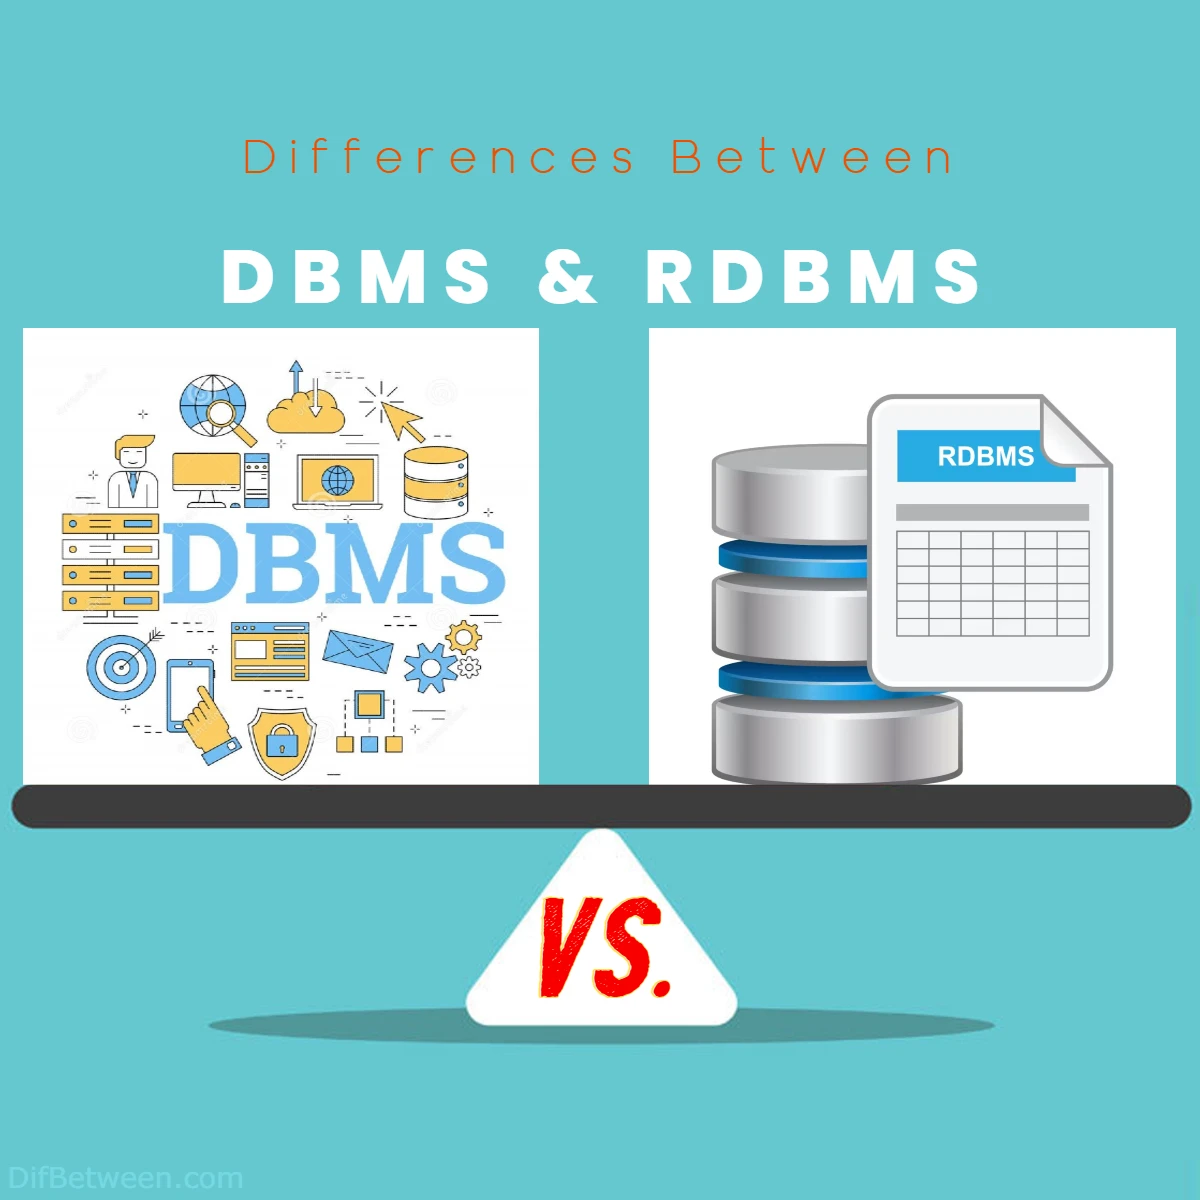 Difference Between RDBMS and DBMS